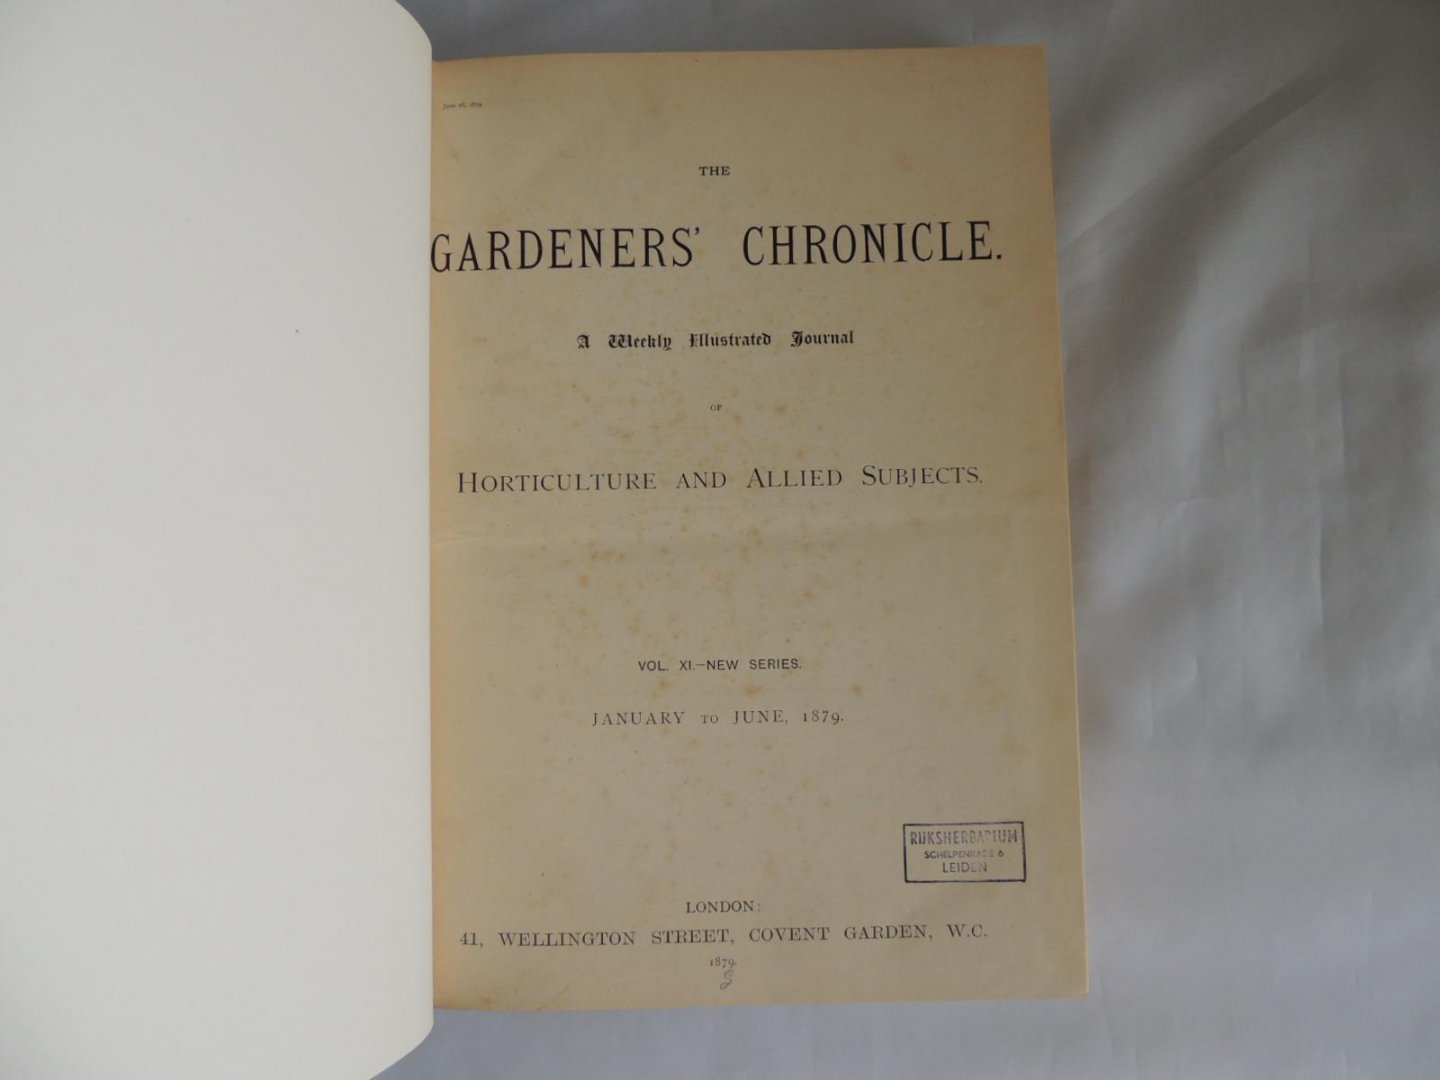  - The gardeners' chronicle - A weekly illustrated journal of horticulture and allied subjects